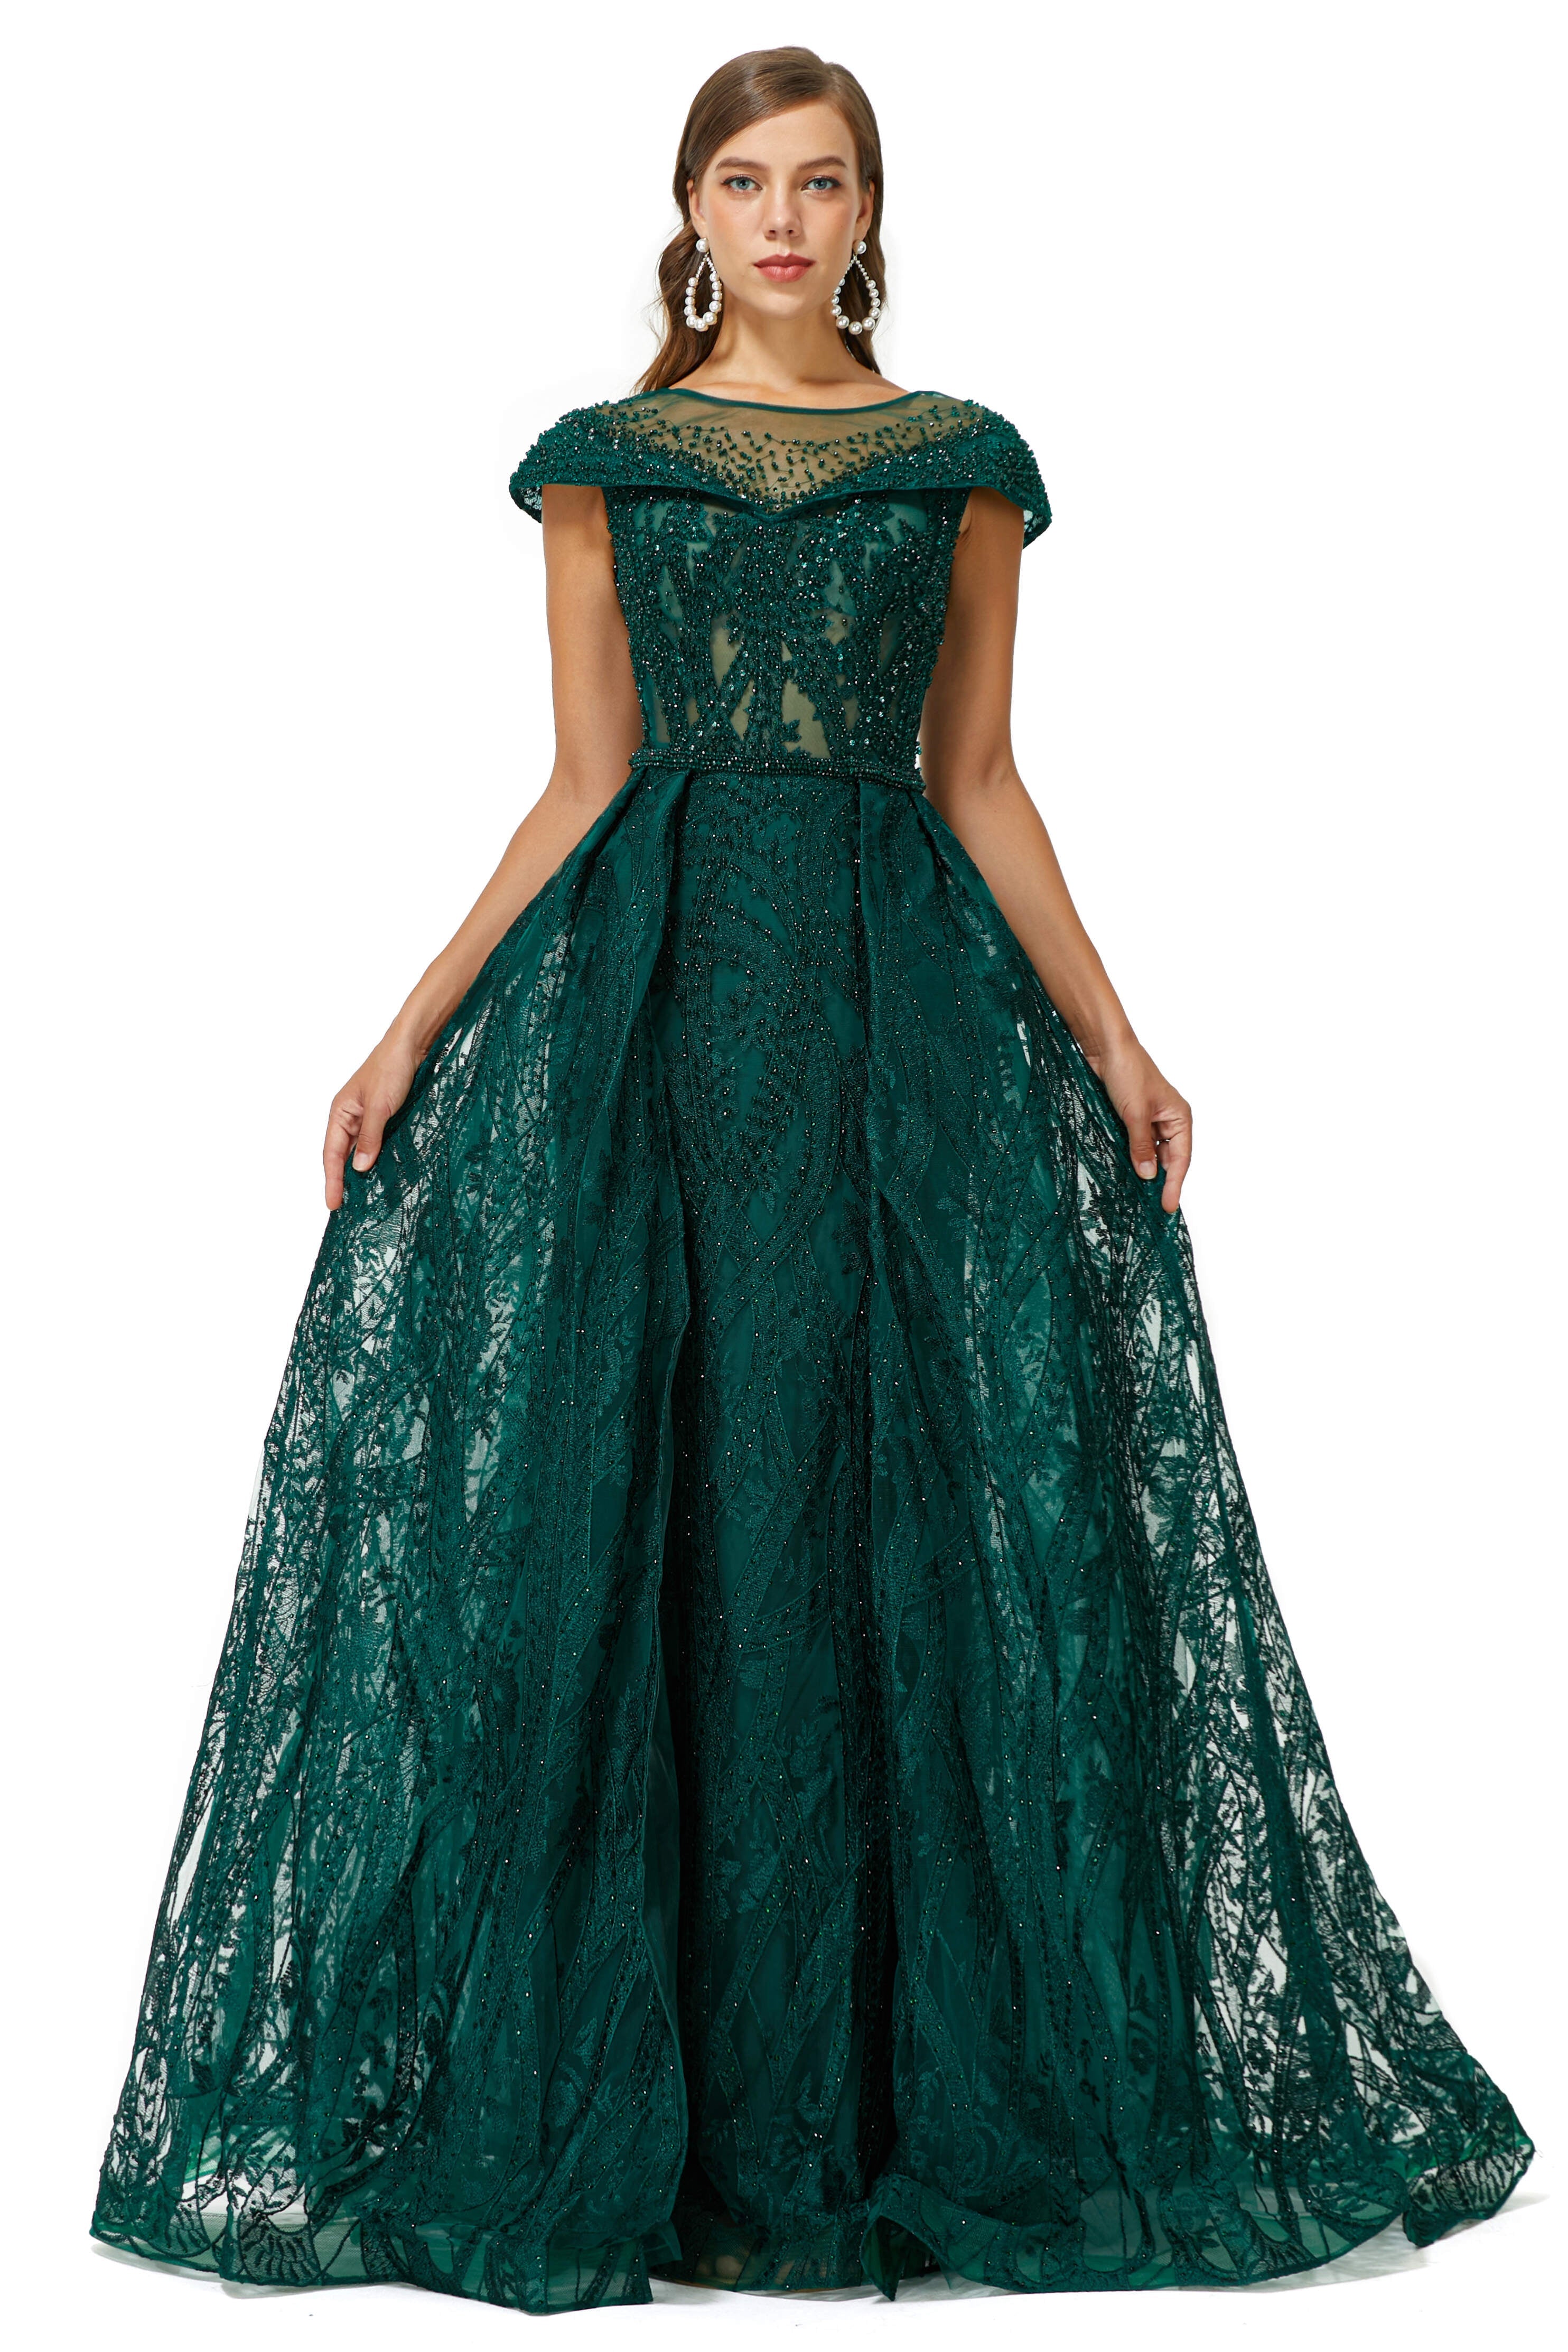 Silk Prom Dress, Beaded Cap Sleeves Prom Dresses with Overskirt